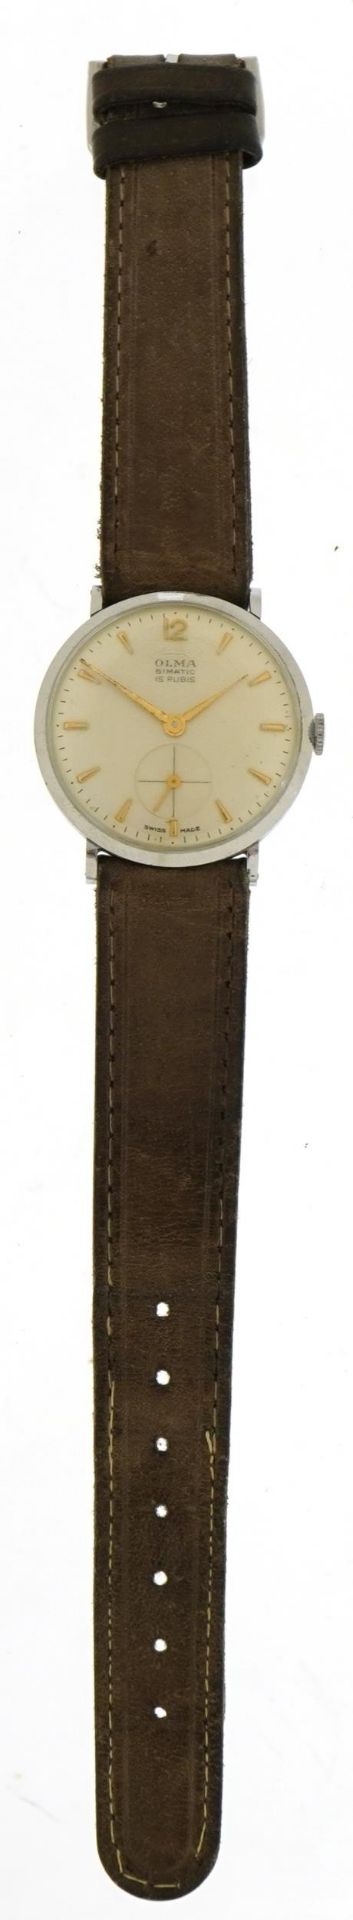 Olma, gentlemen's Olma Bimatic manual wristwatch with subsidiary dial, the case numbered 4354, 31. - Image 2 of 4